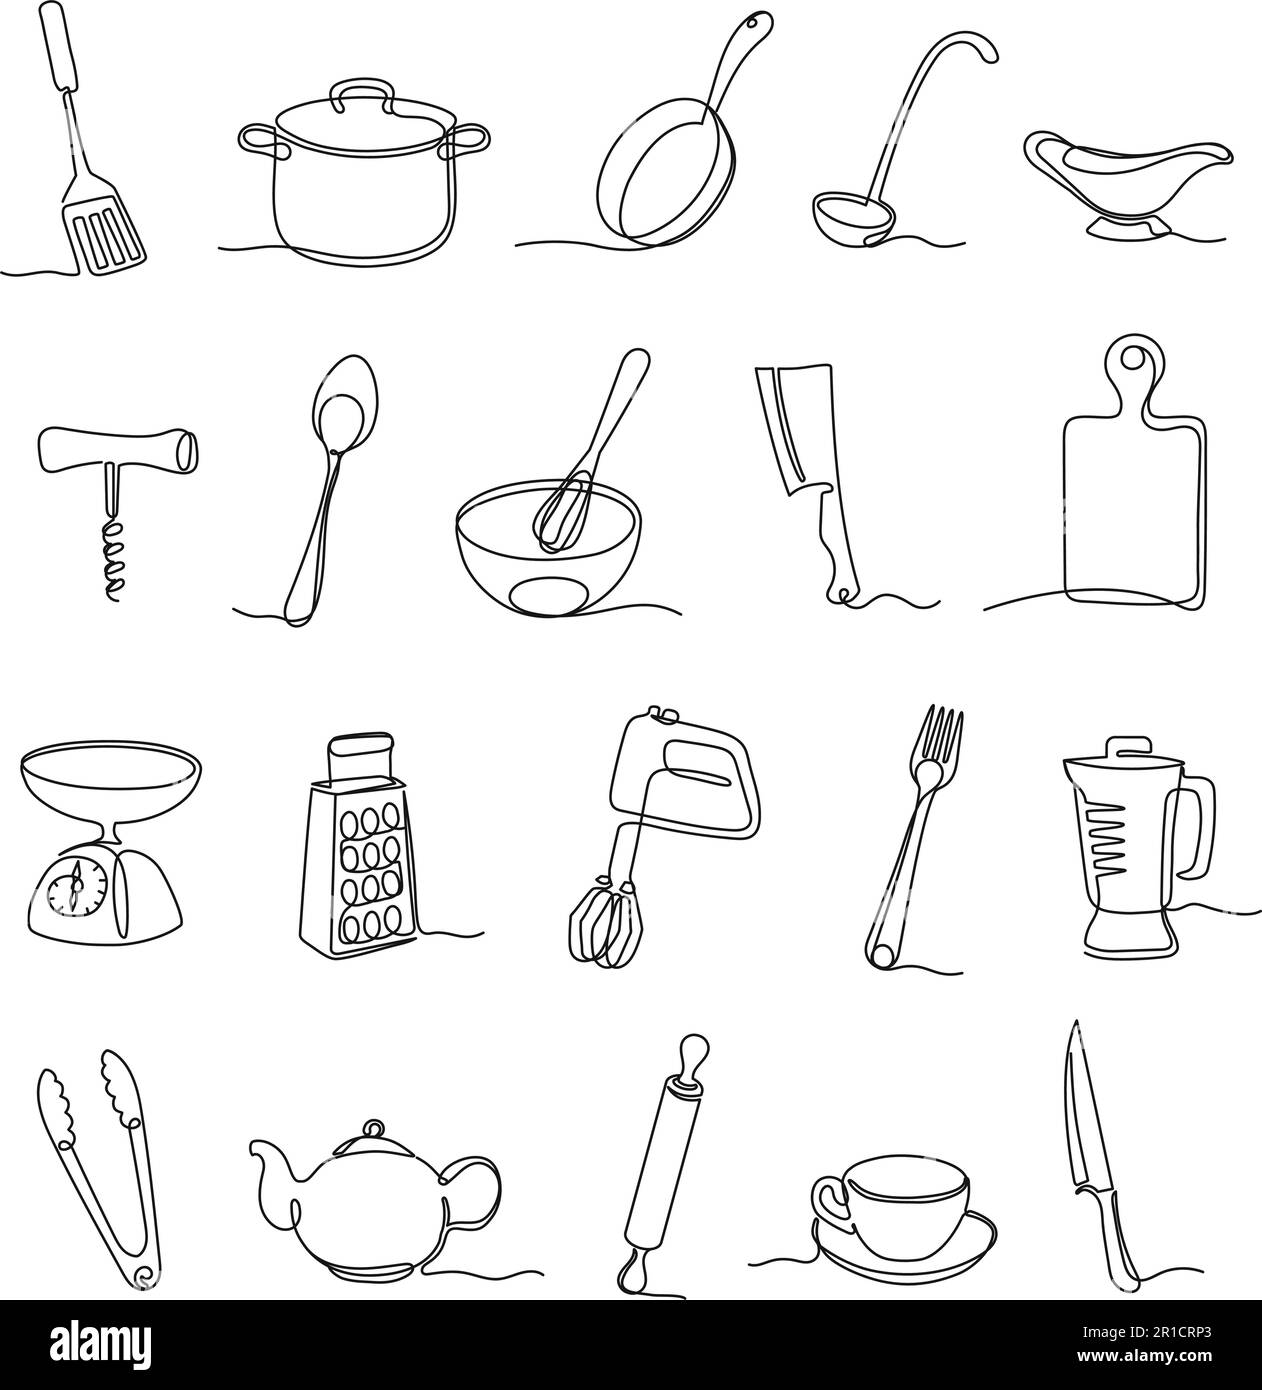 https://c8.alamy.com/comp/2R1CRP3/one-line-kitchen-tools-minimalistic-cooking-equipment-continued-lines-chefs-utensil-and-culinary-gear-vector-set-2R1CRP3.jpg